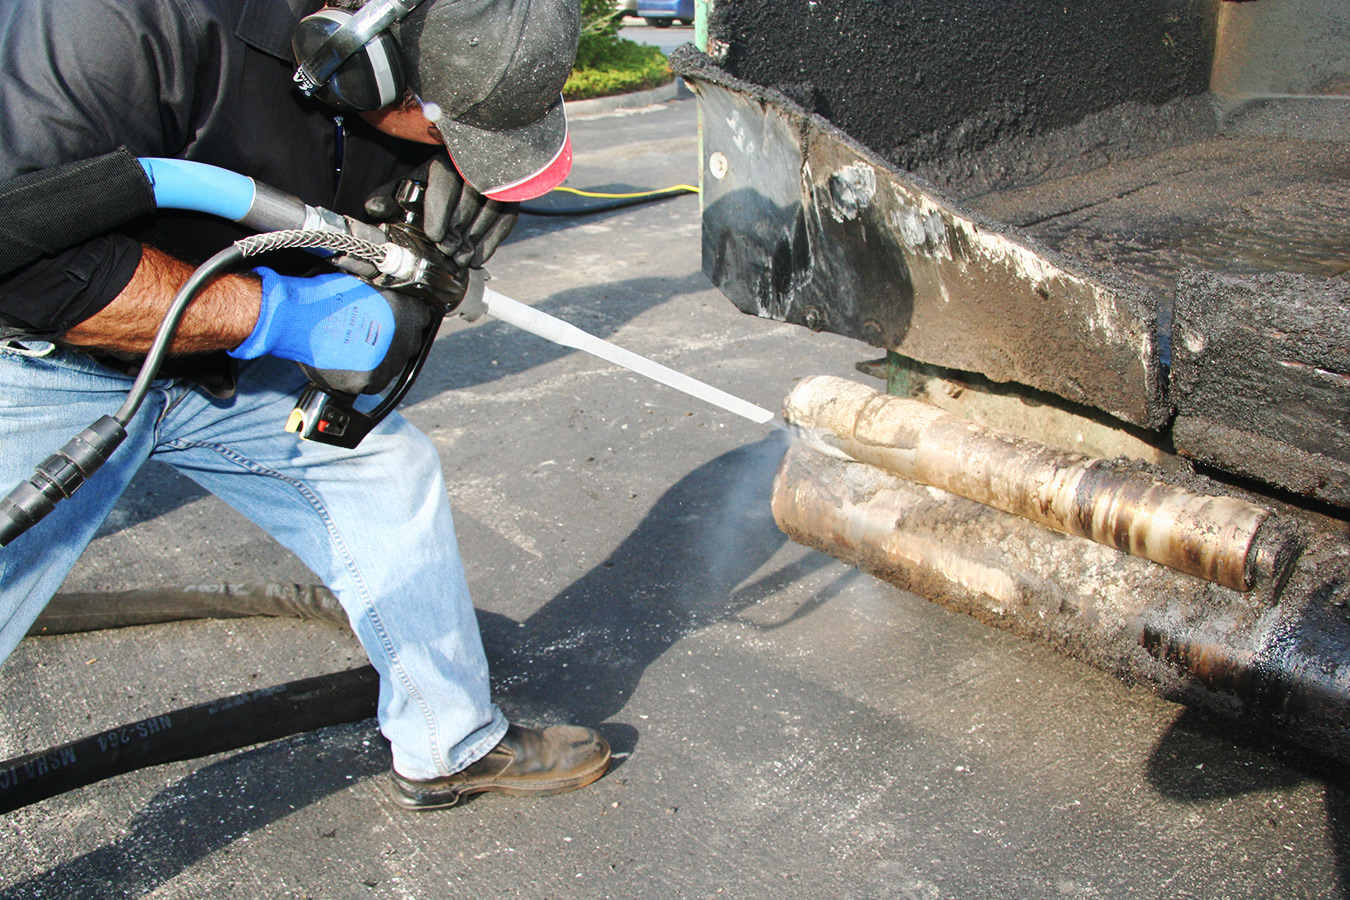 Dry Ice Blasting - Portable, Versatile & Quiet Cleaning with Dry Ice Pellets